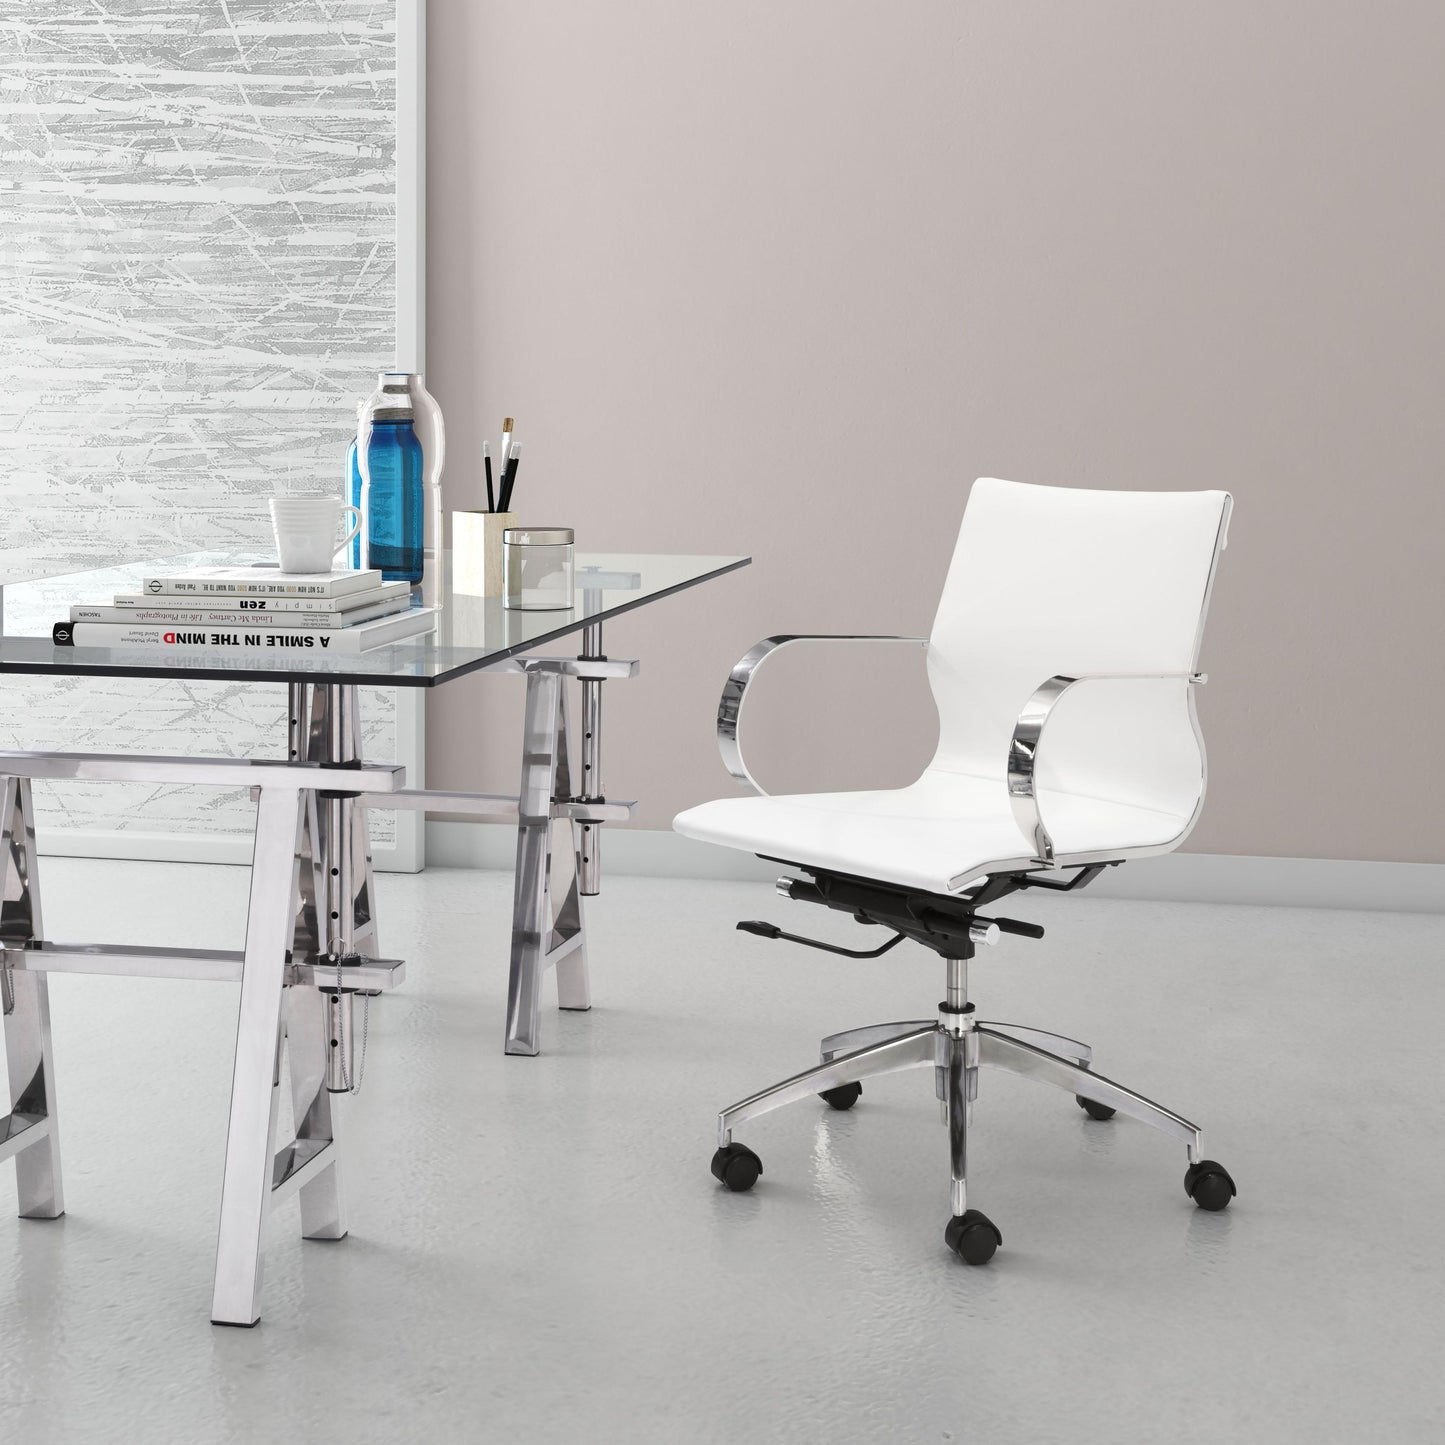 Glider Low Back Office Chair White